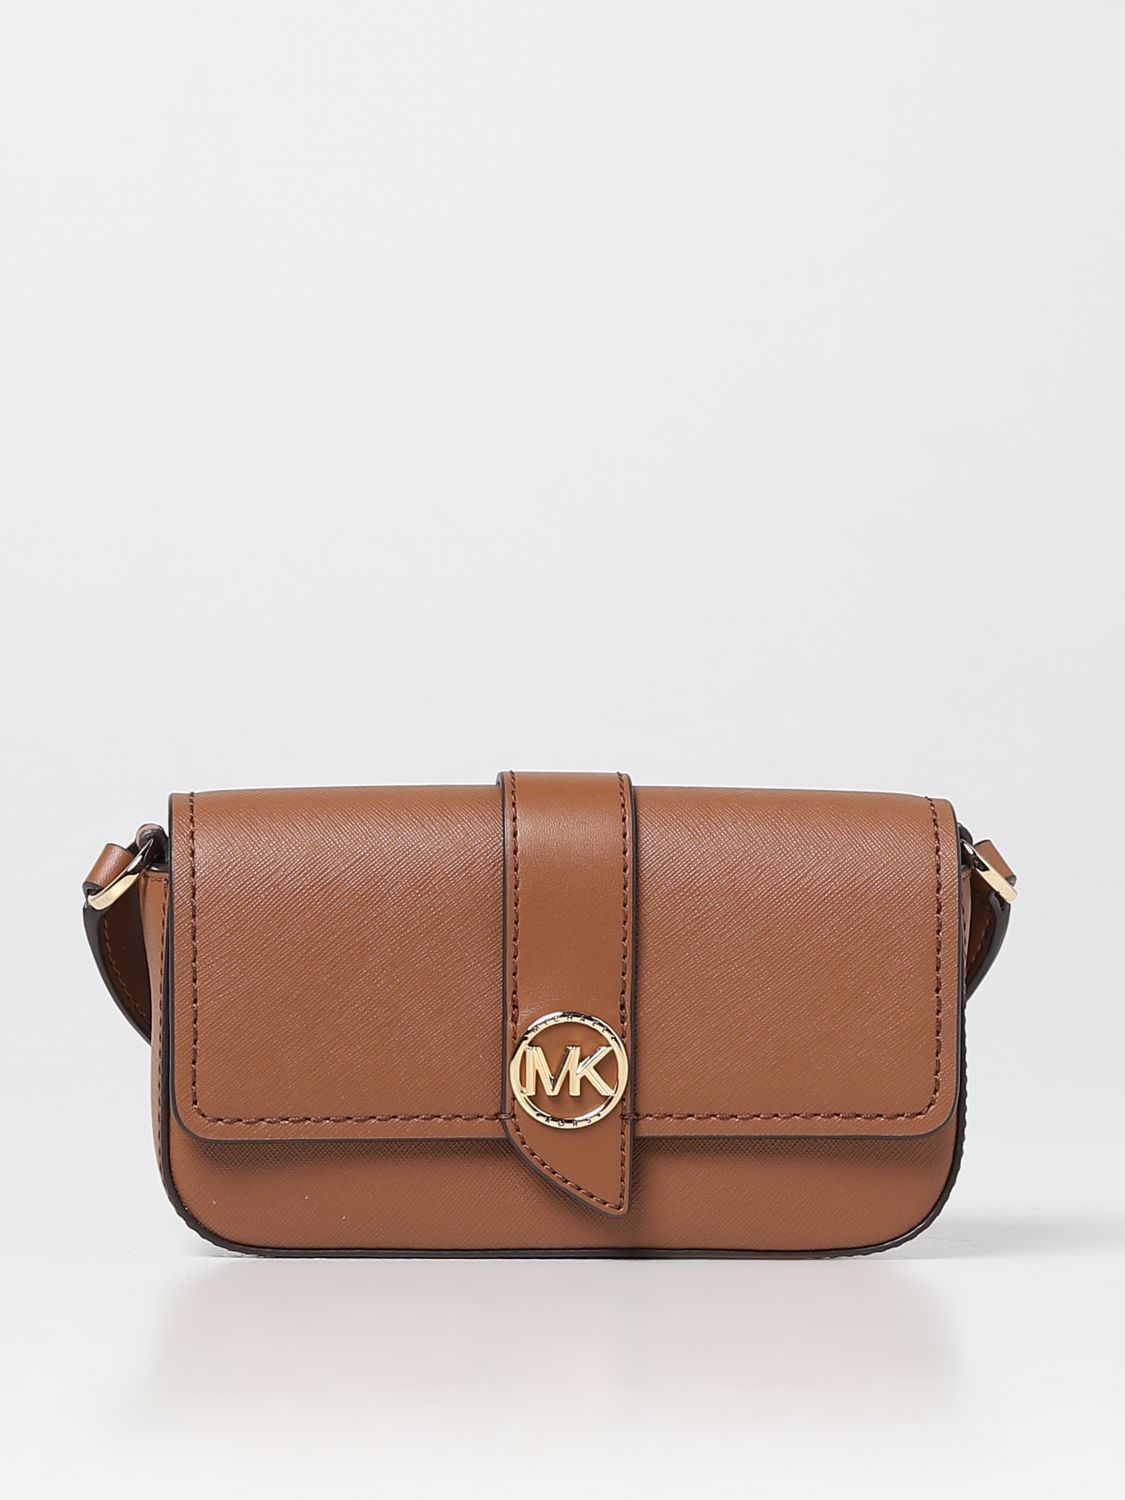 Michael Kors Outlet: Michael Greenwich bag in leather - Black